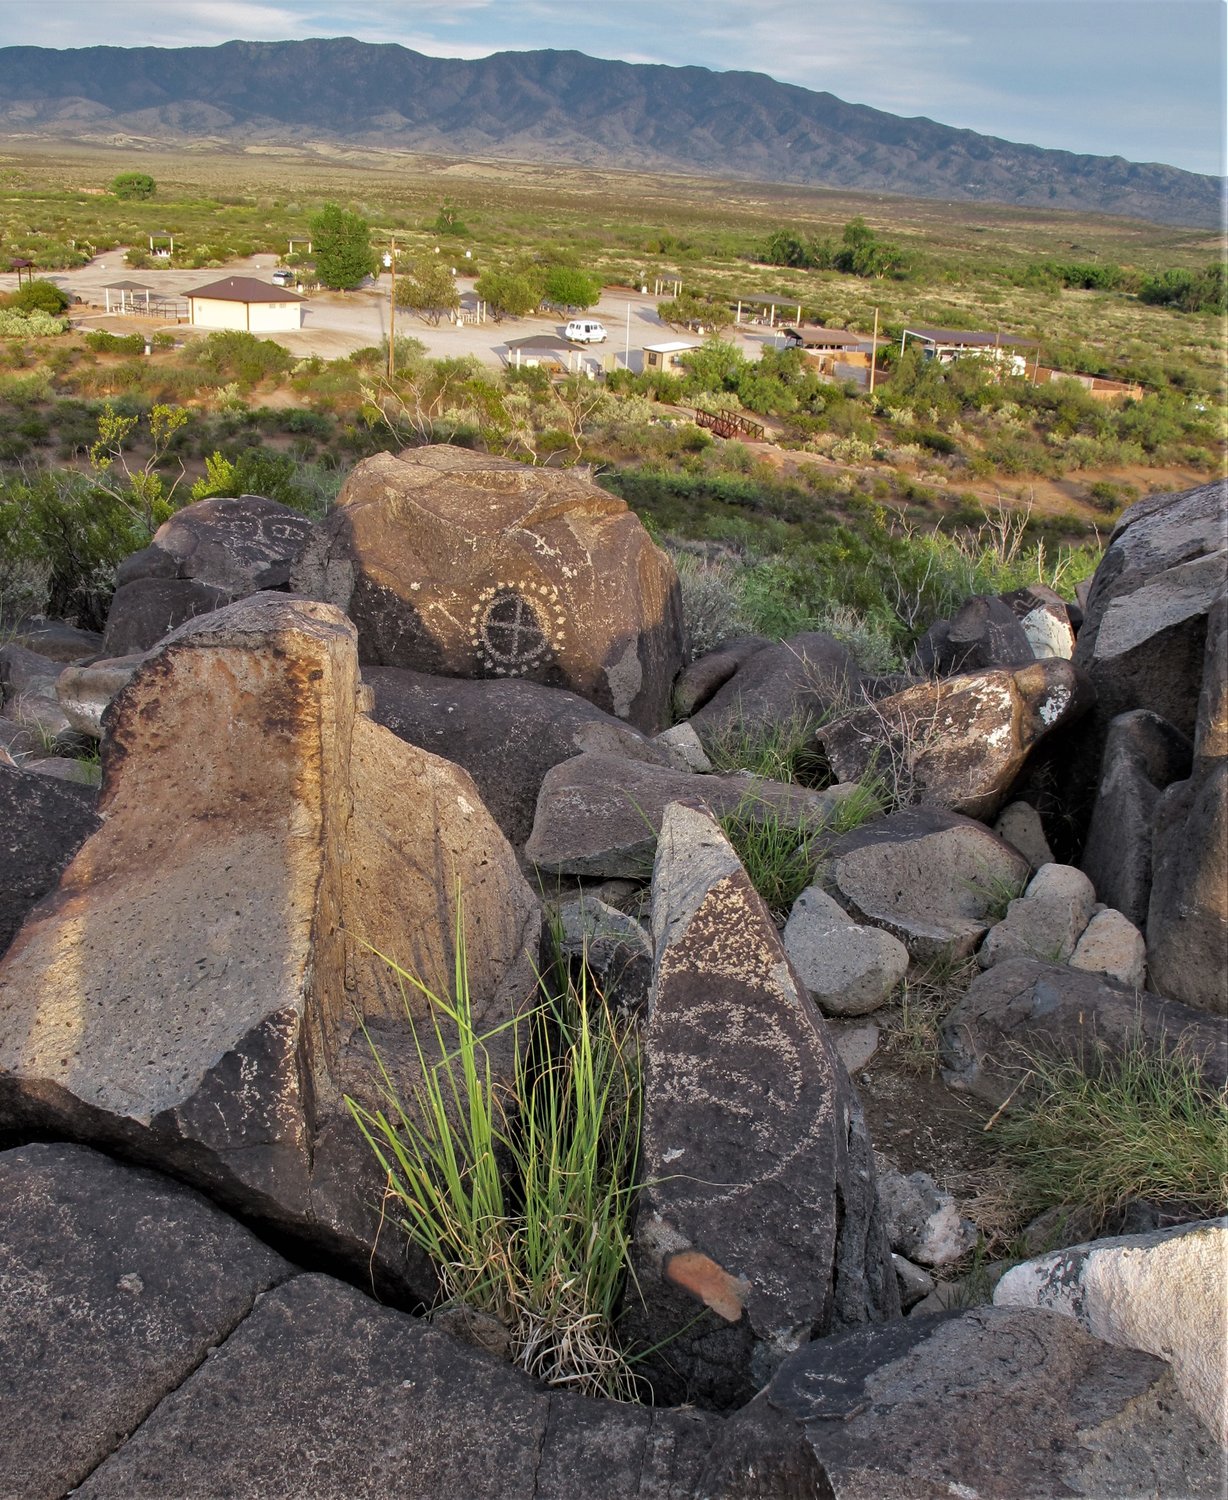 On Summer Solstice sunset, half of a face on a cone shape stone casts a cone shadow into a circle and cross behind it at Three Rivers Petroglyph Site.